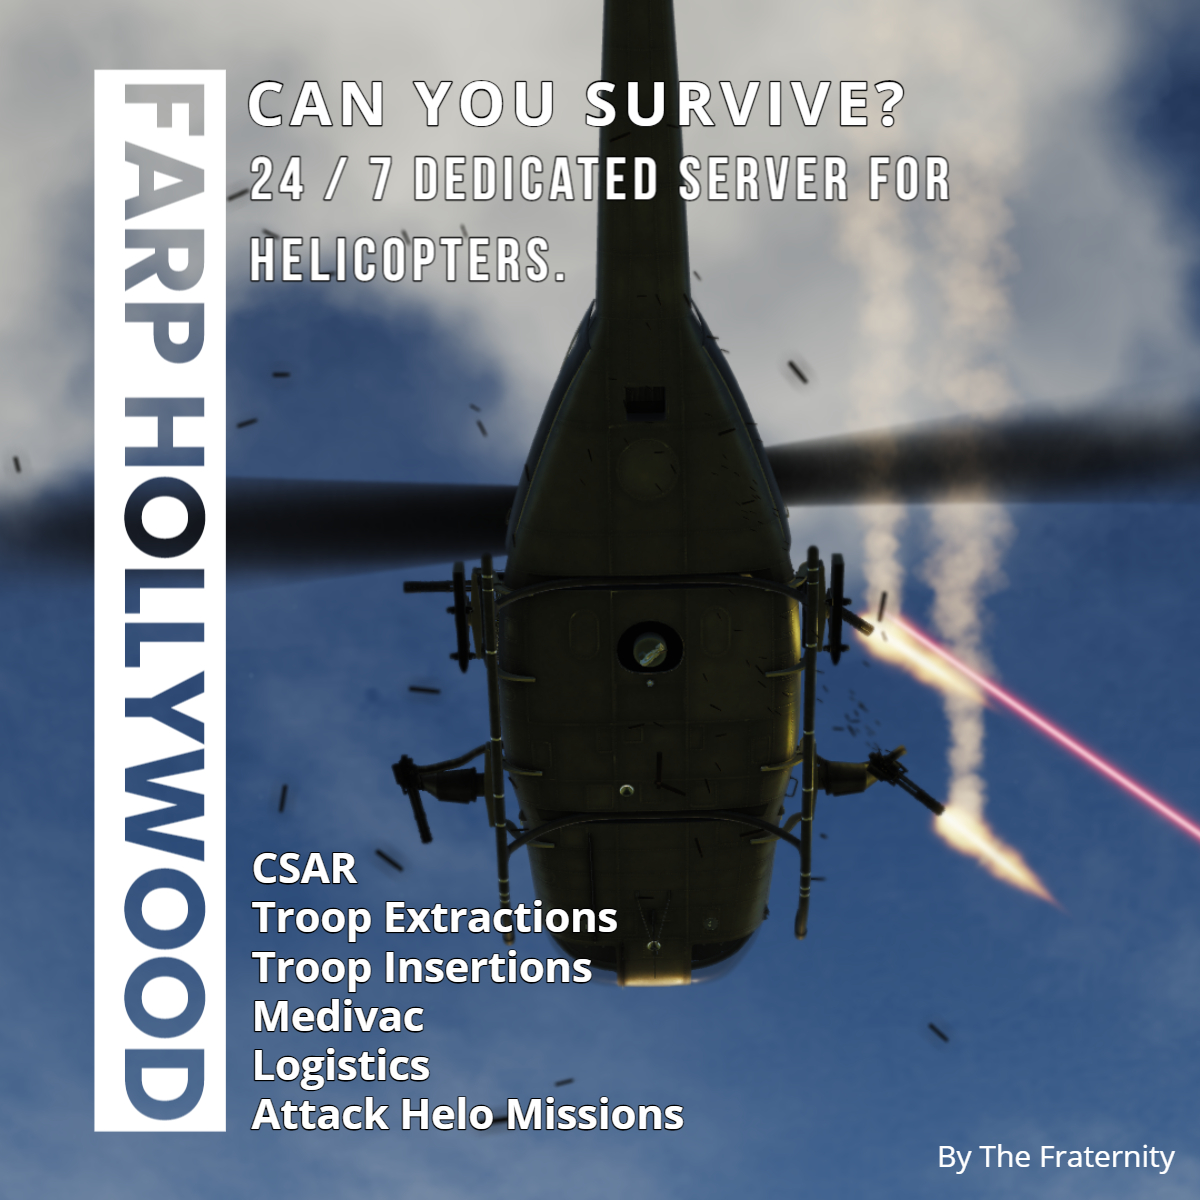 (Retired) FARP Hollywood - Caucasus [Helicopter Sandbox] - All Helo Modules (Single or Multiplayer) by Element